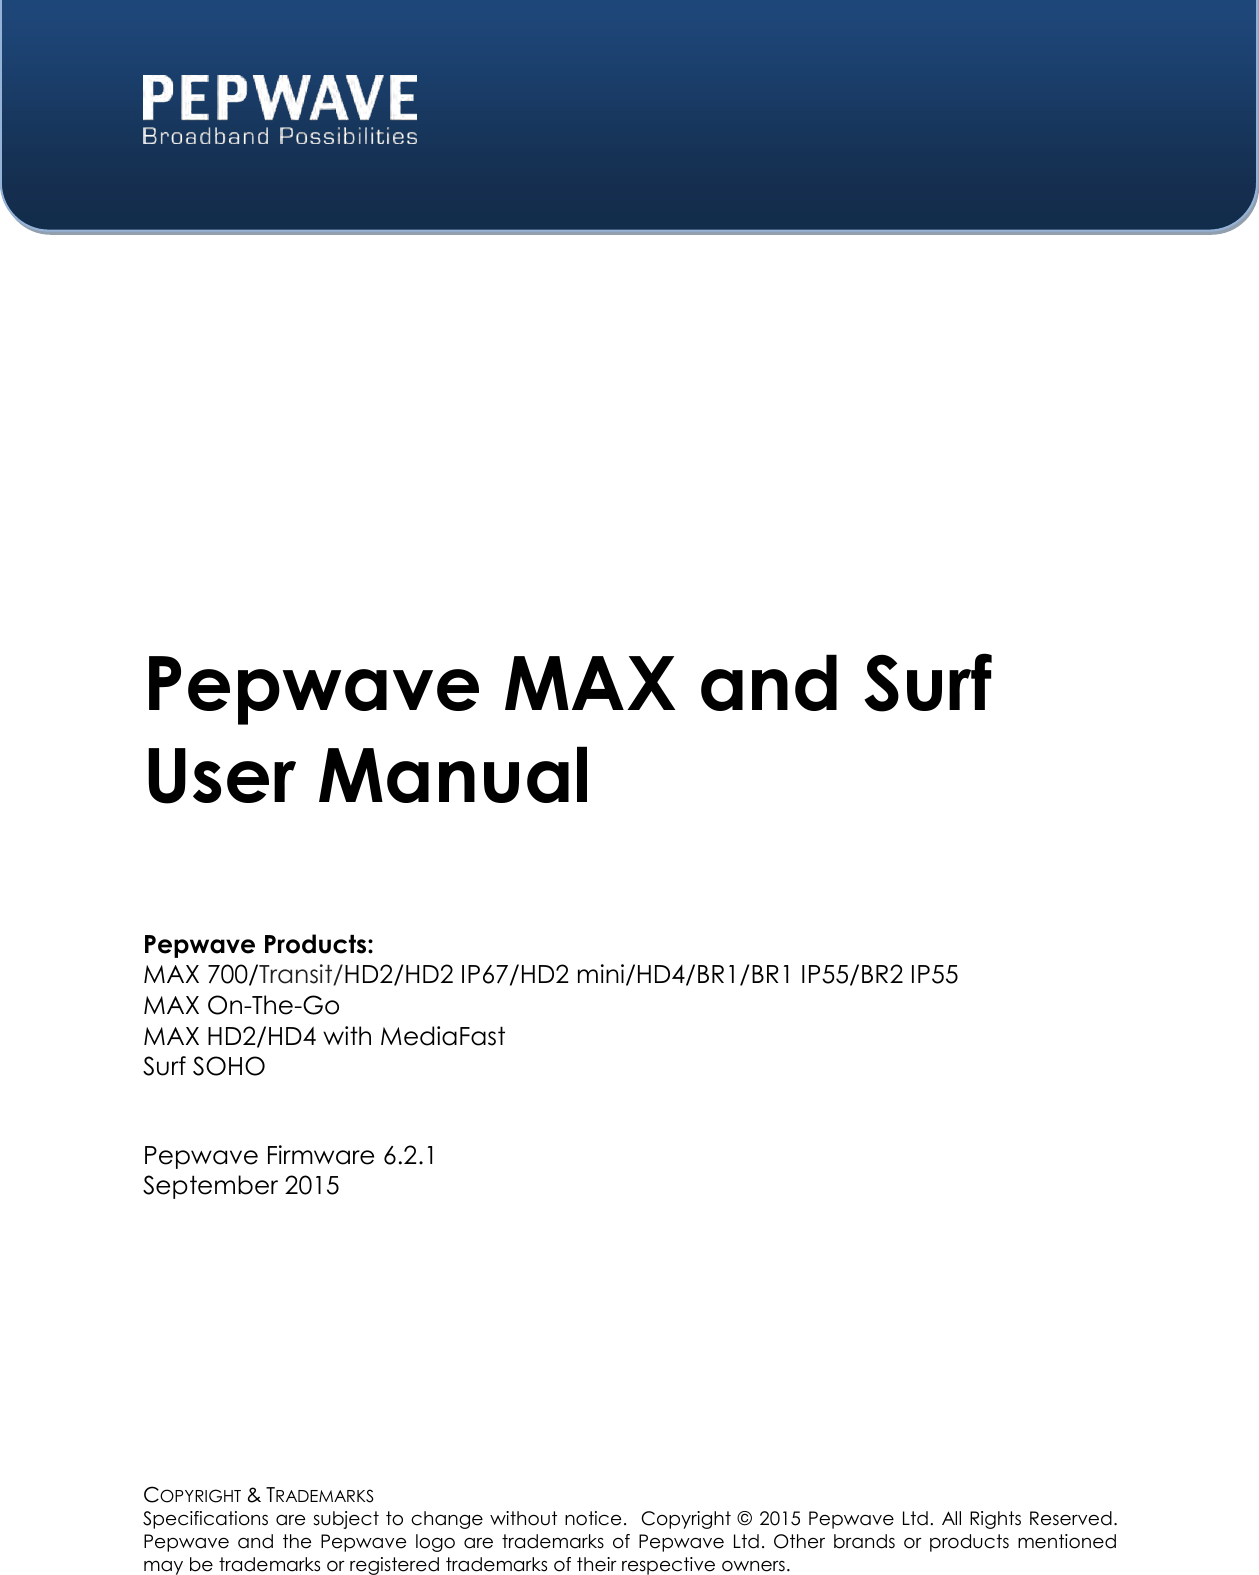  COPYRIGHT &amp; TRADEMARKS Specifications are subject to change without notice.  Copyright ©   2015 Pepwave Ltd. All Rights Reserved.  Pepwave and  the  Pepwave  logo  are  trademarks  of  Pepwave  Ltd.  Other  brands  or  products  mentioned may be trademarks or registered trademarks of their respective owners.    Pepwave MAX and Surf User Manual  Pepwave Products: MAX 700/Transit/HD2/HD2 IP67/HD2 mini/HD4/BR1/BR1 IP55/BR2 IP55 MAX On-The-Go MAX HD2/HD4 with MediaFast Surf SOHO   Pepwave Firmware 6.2.1 September 2015